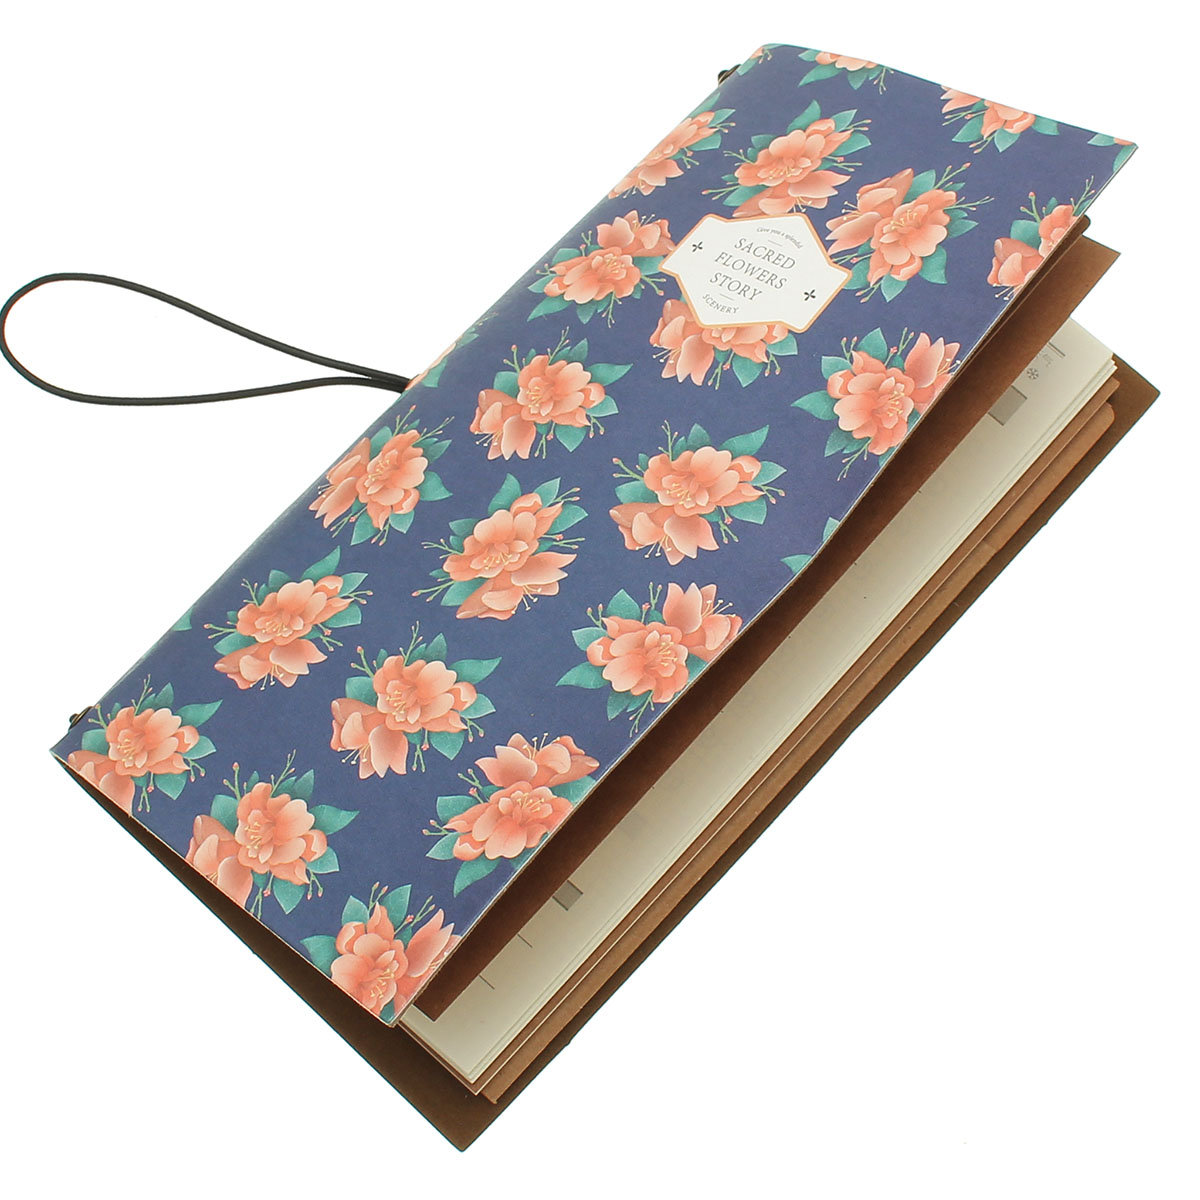 Vintage Countryside Floral Pattern Buckle Notebook Journal Diary School Office Supplies